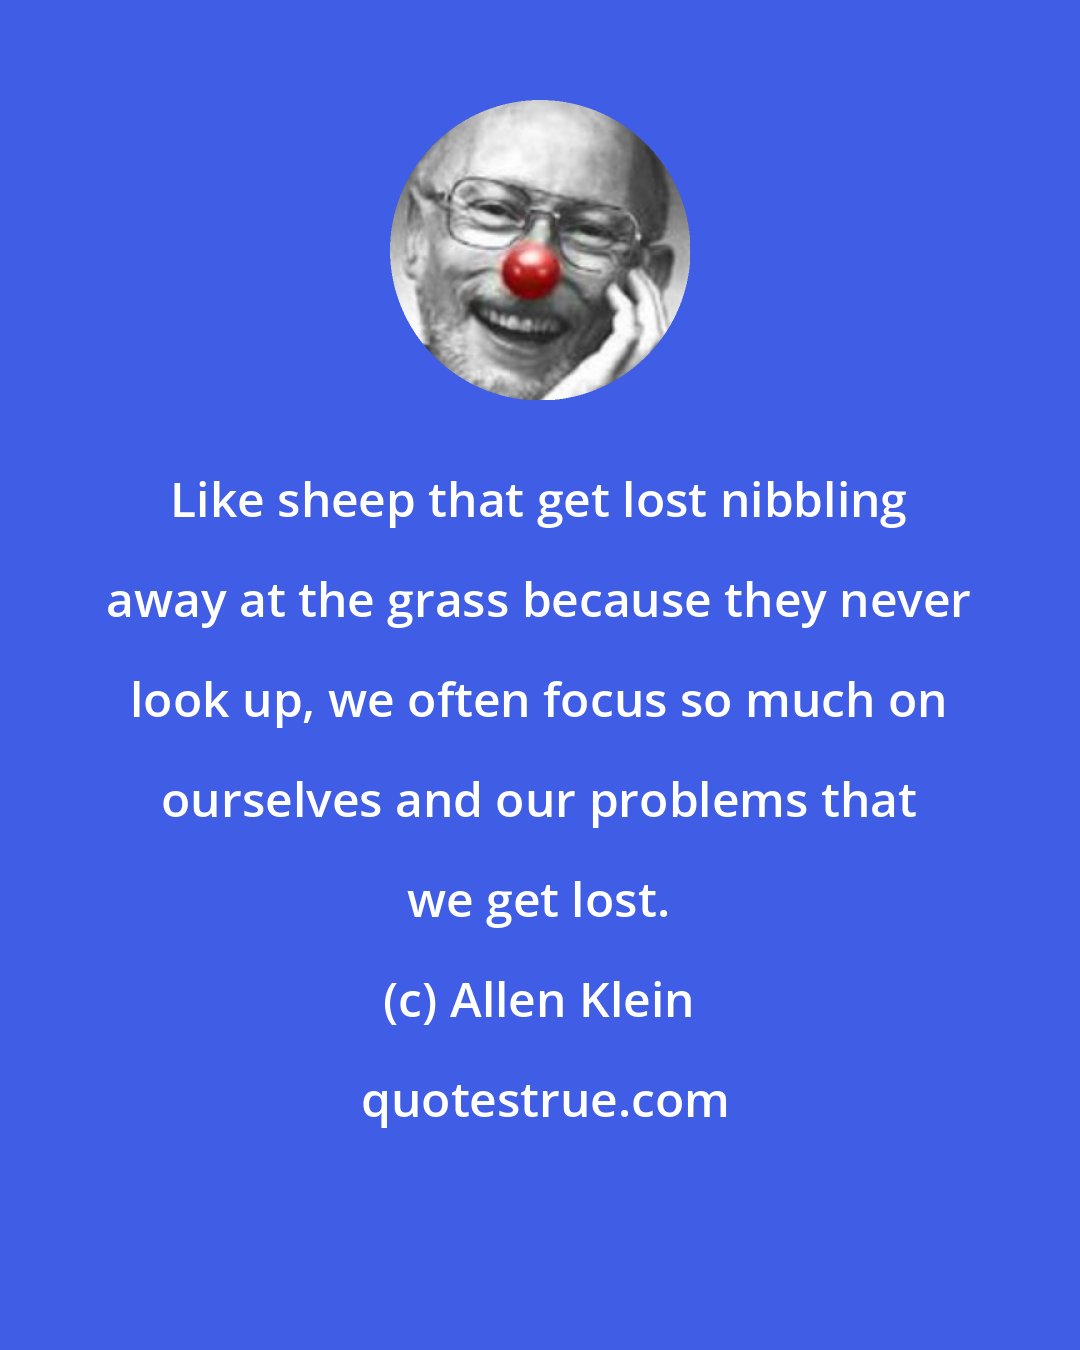 Allen Klein: Like sheep that get lost nibbling away at the grass because they never look up, we often focus so much on ourselves and our problems that we get lost.